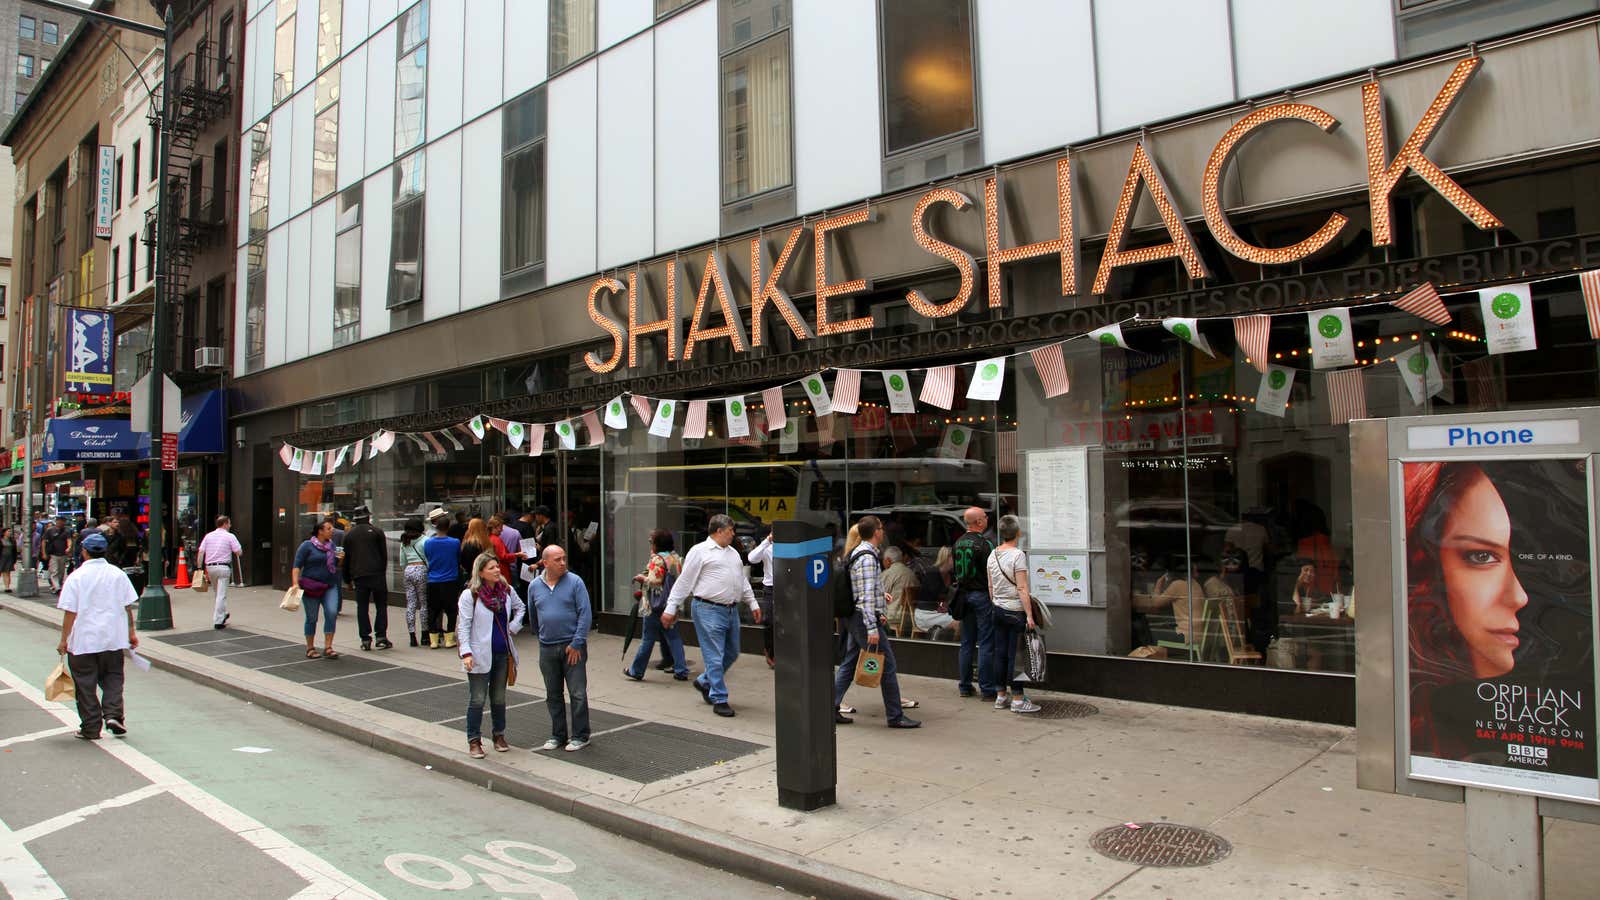 Shake Shack: More than just burgers, at least for a limited time.